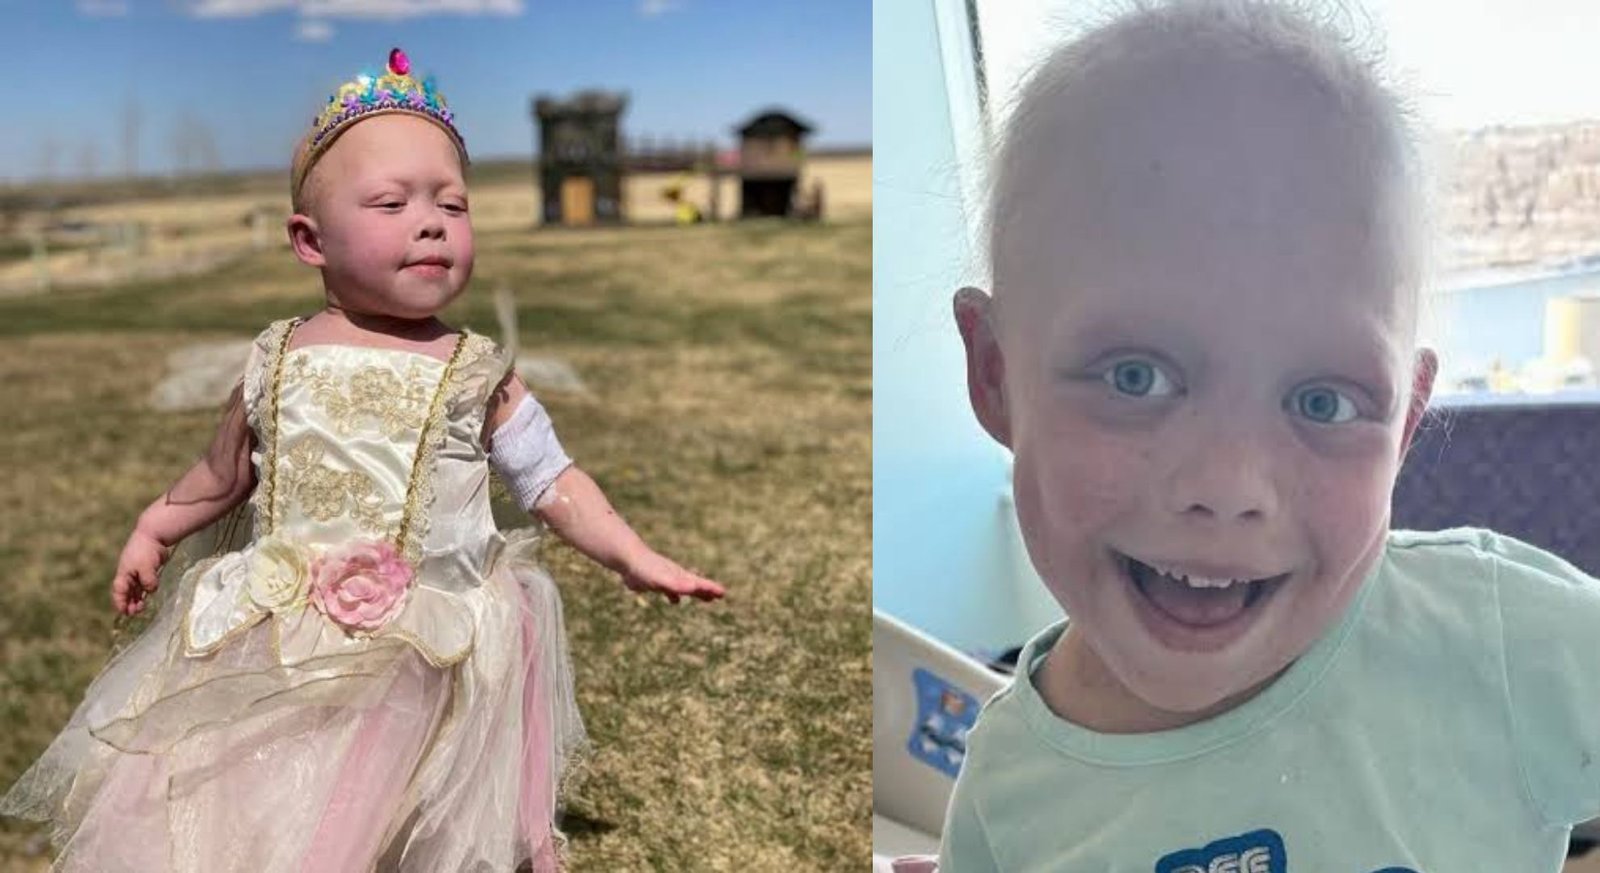 TikTok sensation Bella Brave passes away at 10, days after being placed in medically induced coma